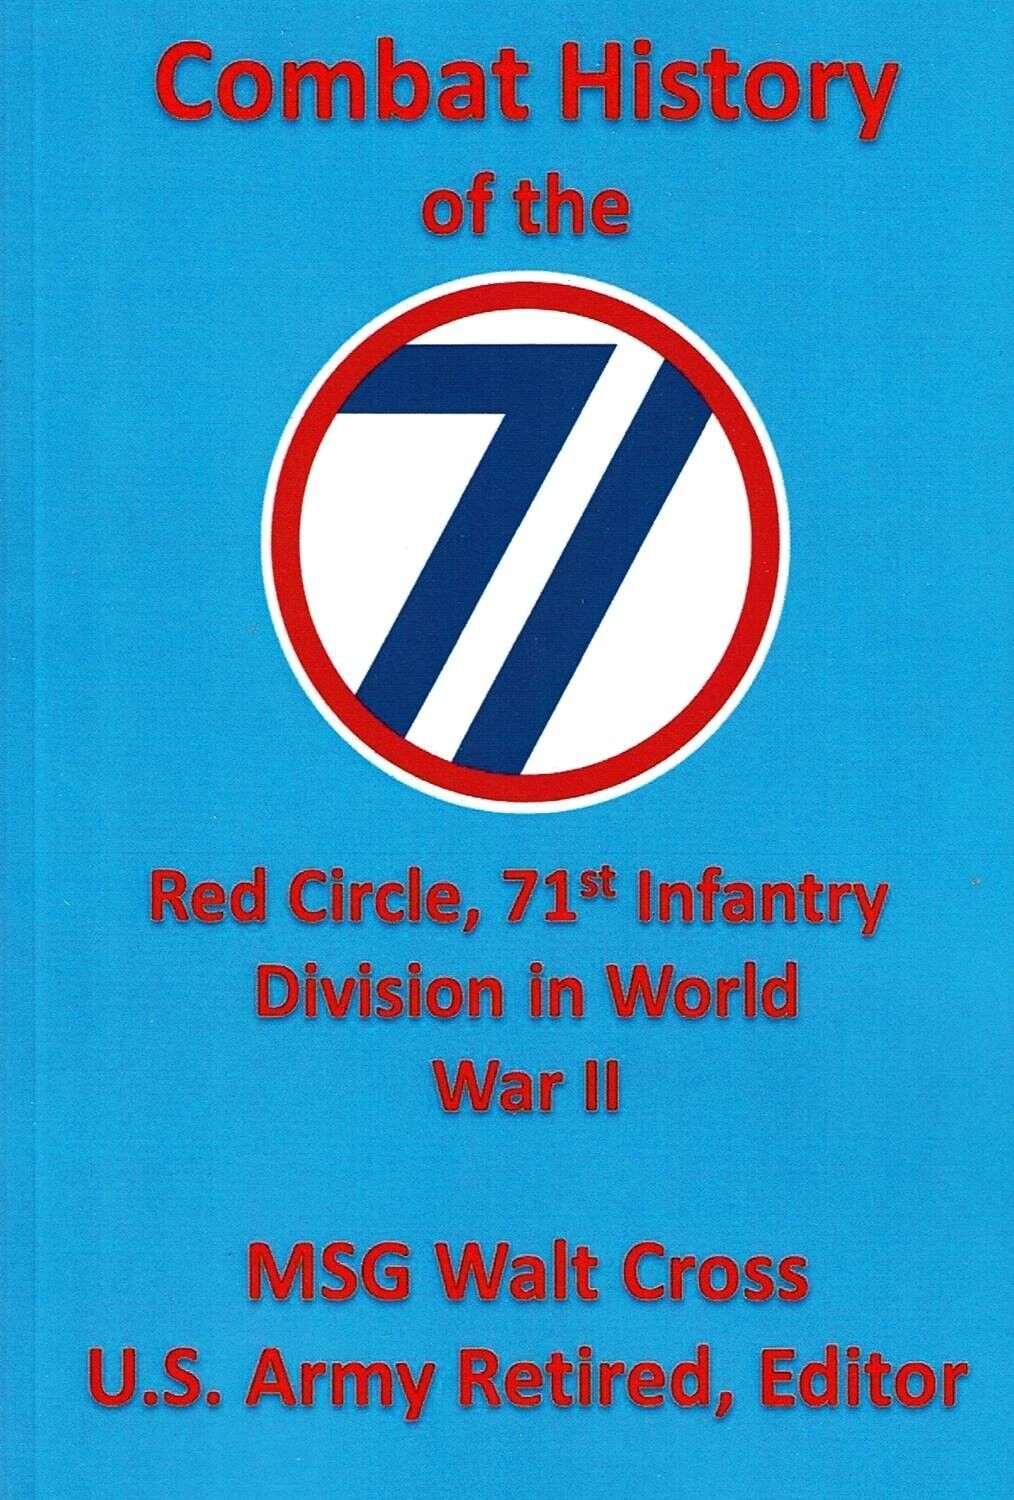 COMBAT HISTORY OF THE RED CIRCLE, 71ST INFANTRY DIVISION IN WWII for ...